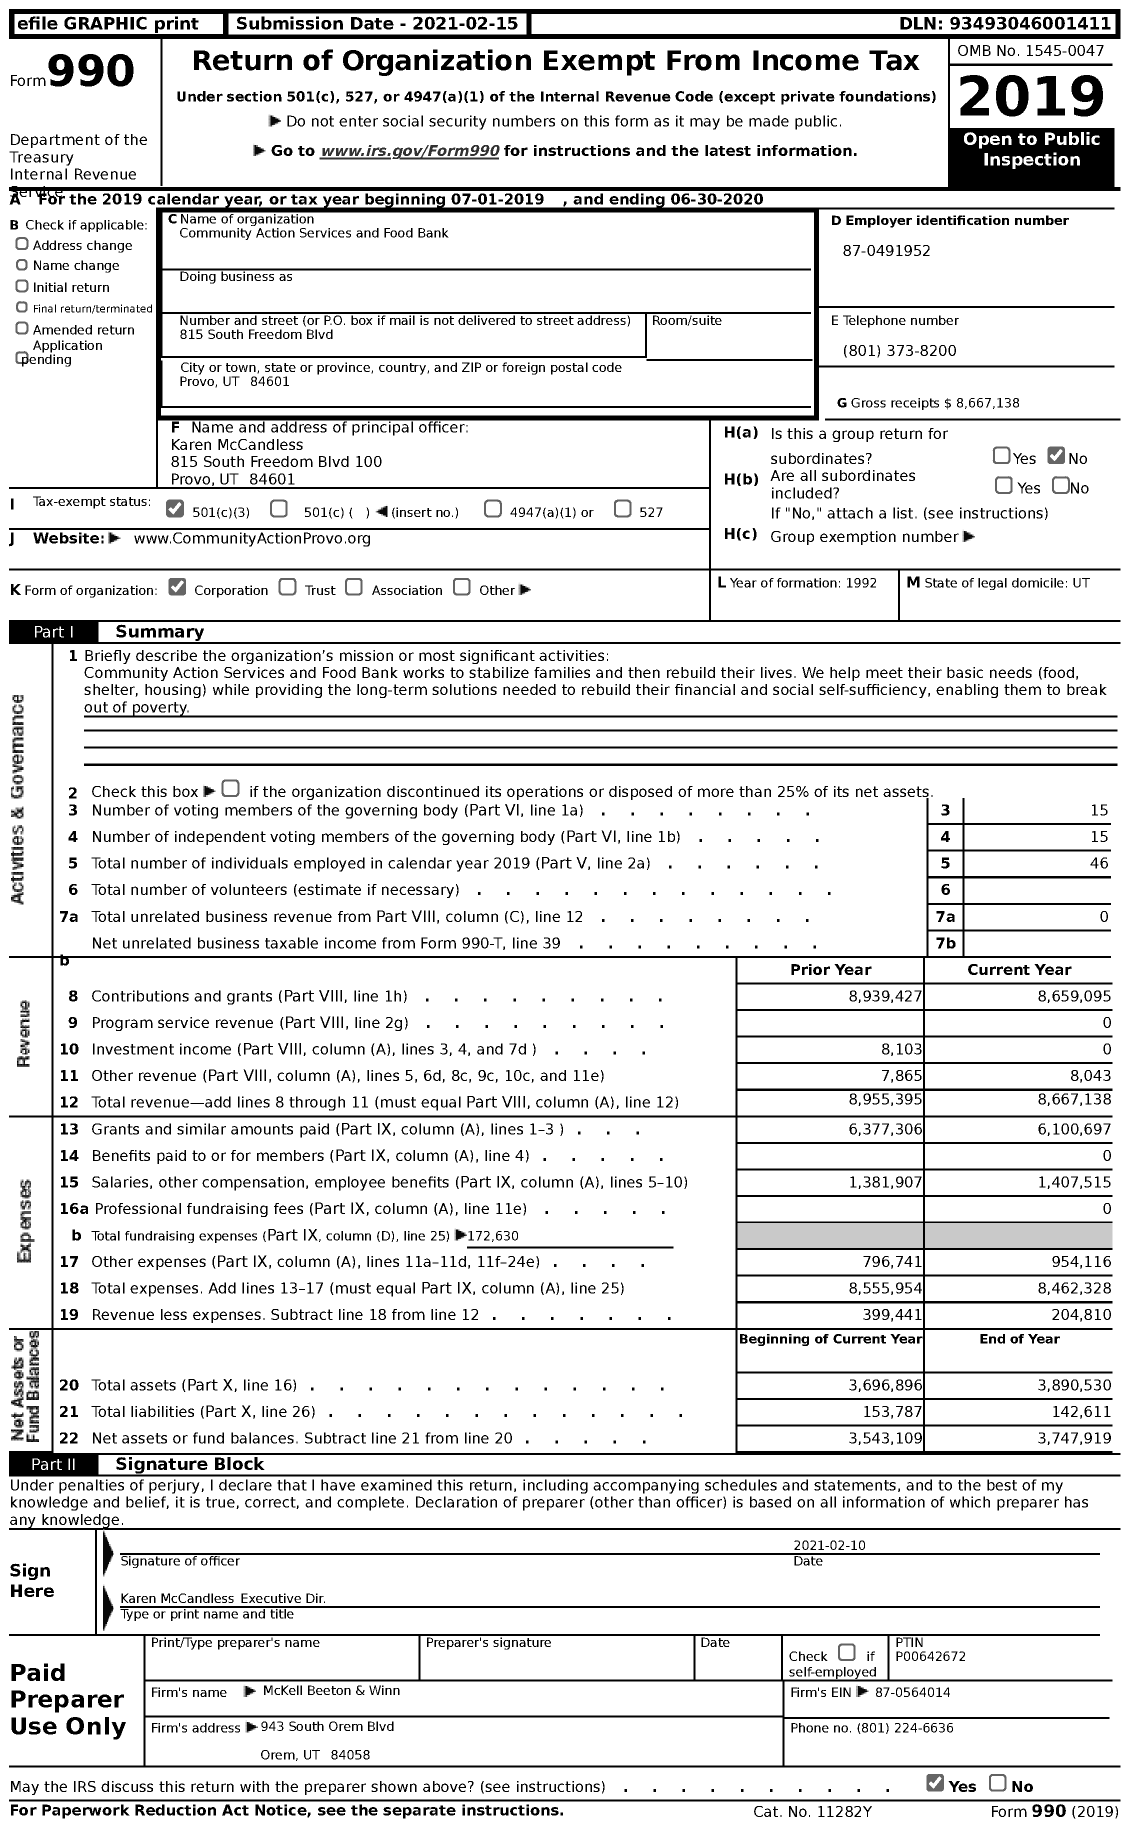 Image of first page of 2019 Form 990 for Community Action Services and Food Bank